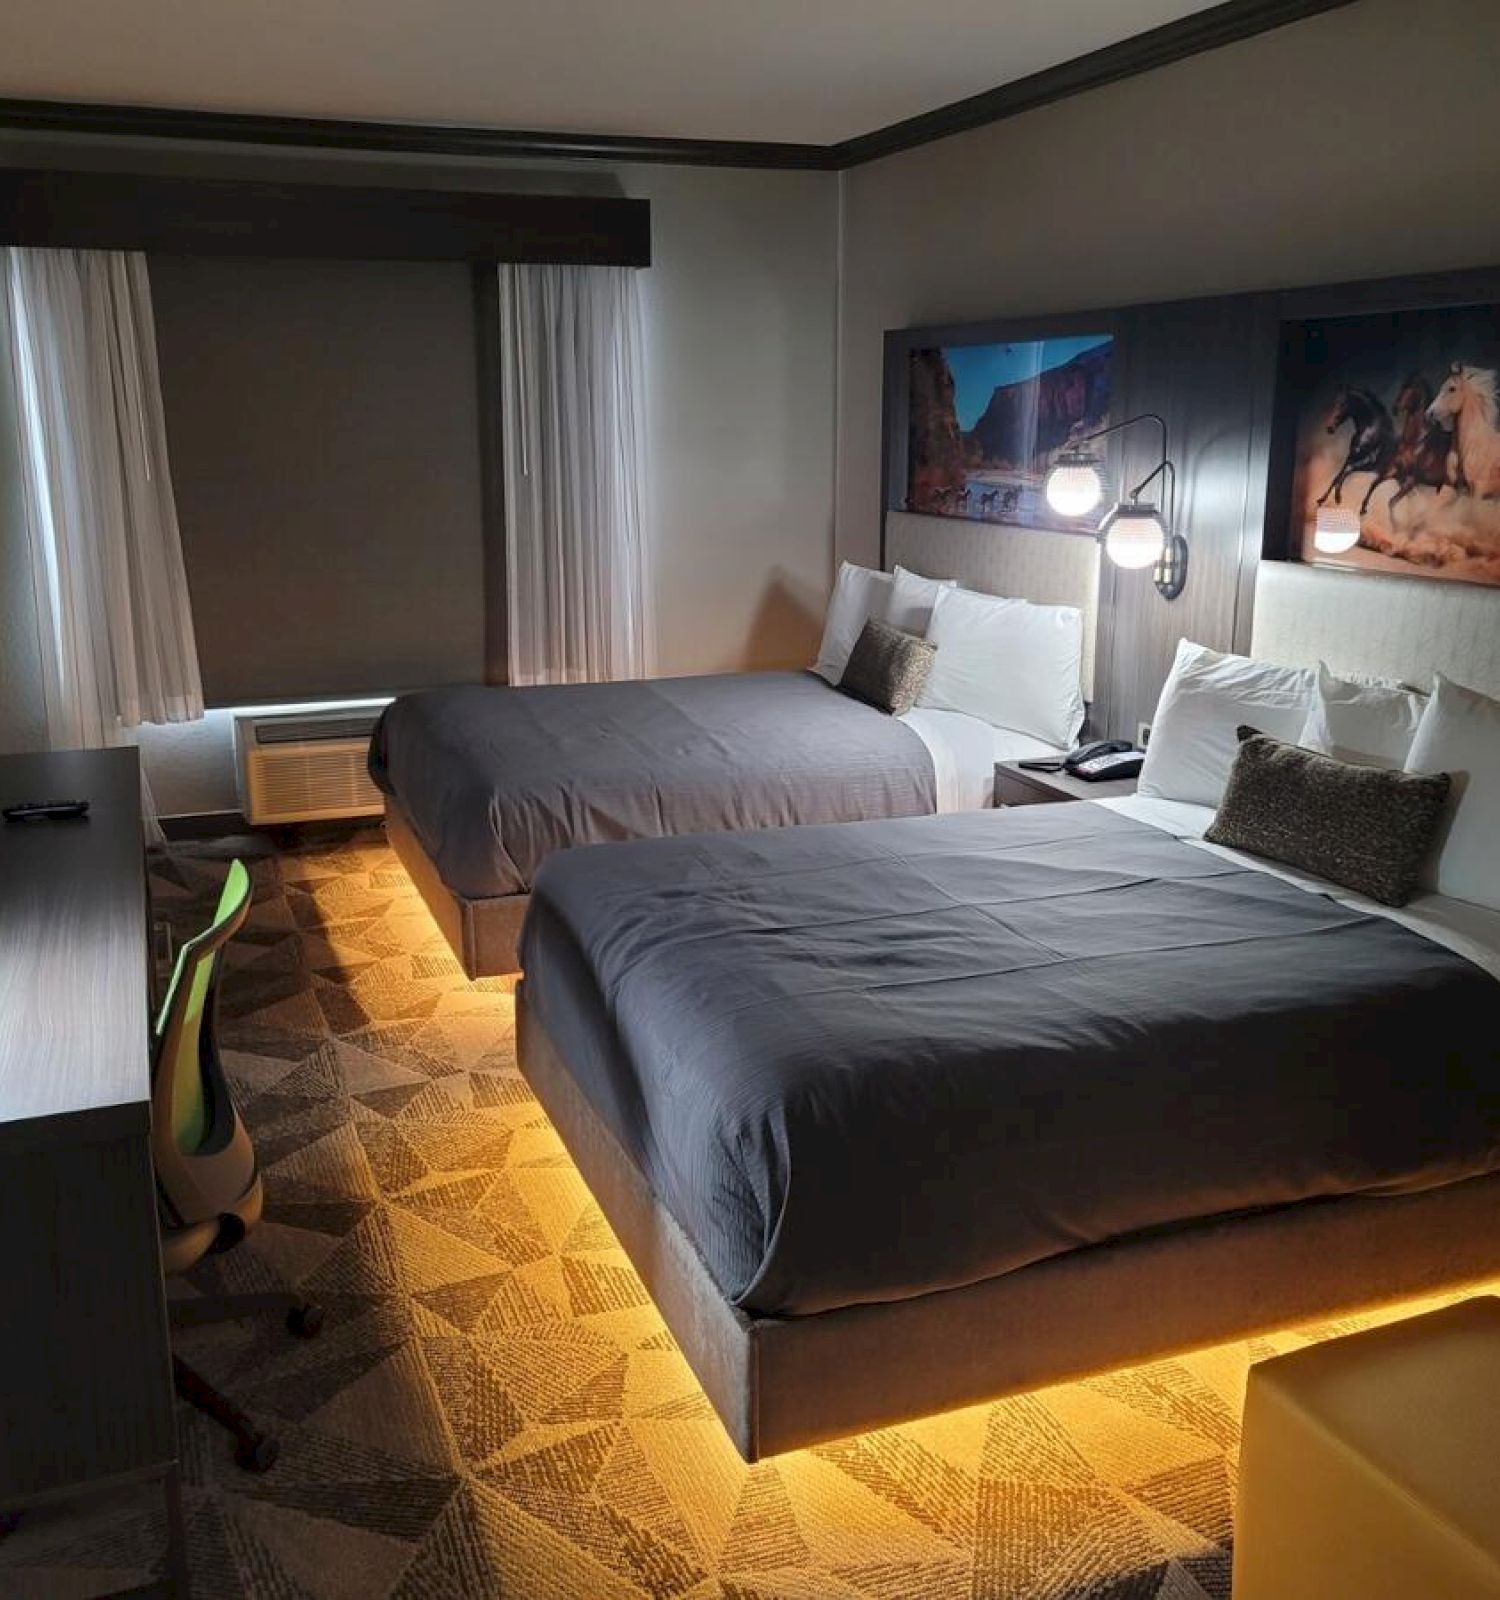 The image shows a modern hotel room with two beds, nightstands, a desk with a chair, a TV, and a painting above the beds.